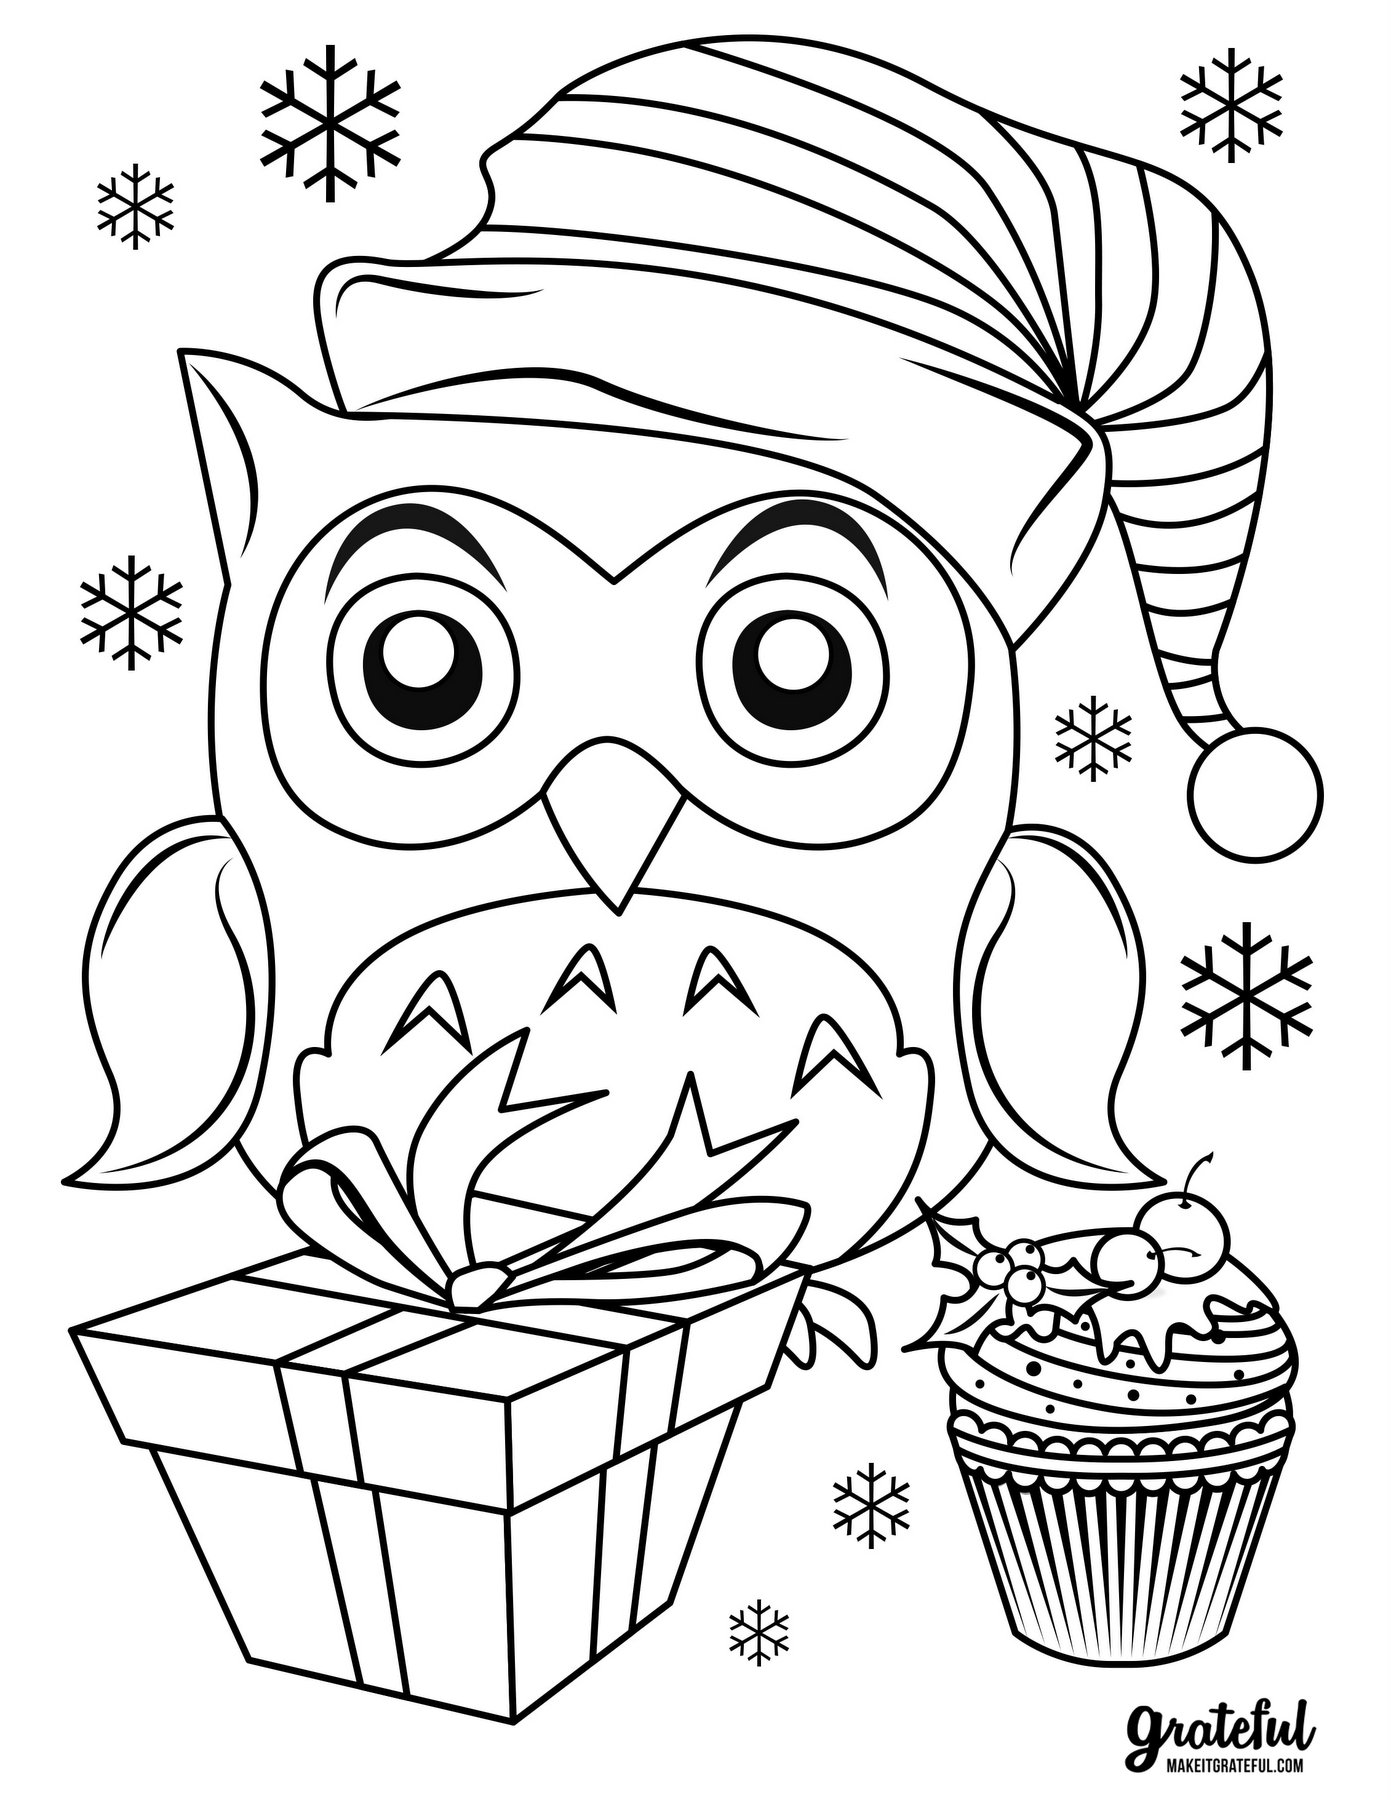 Christmas Coloring Pages Frosty The Snowman | Hakume Colors